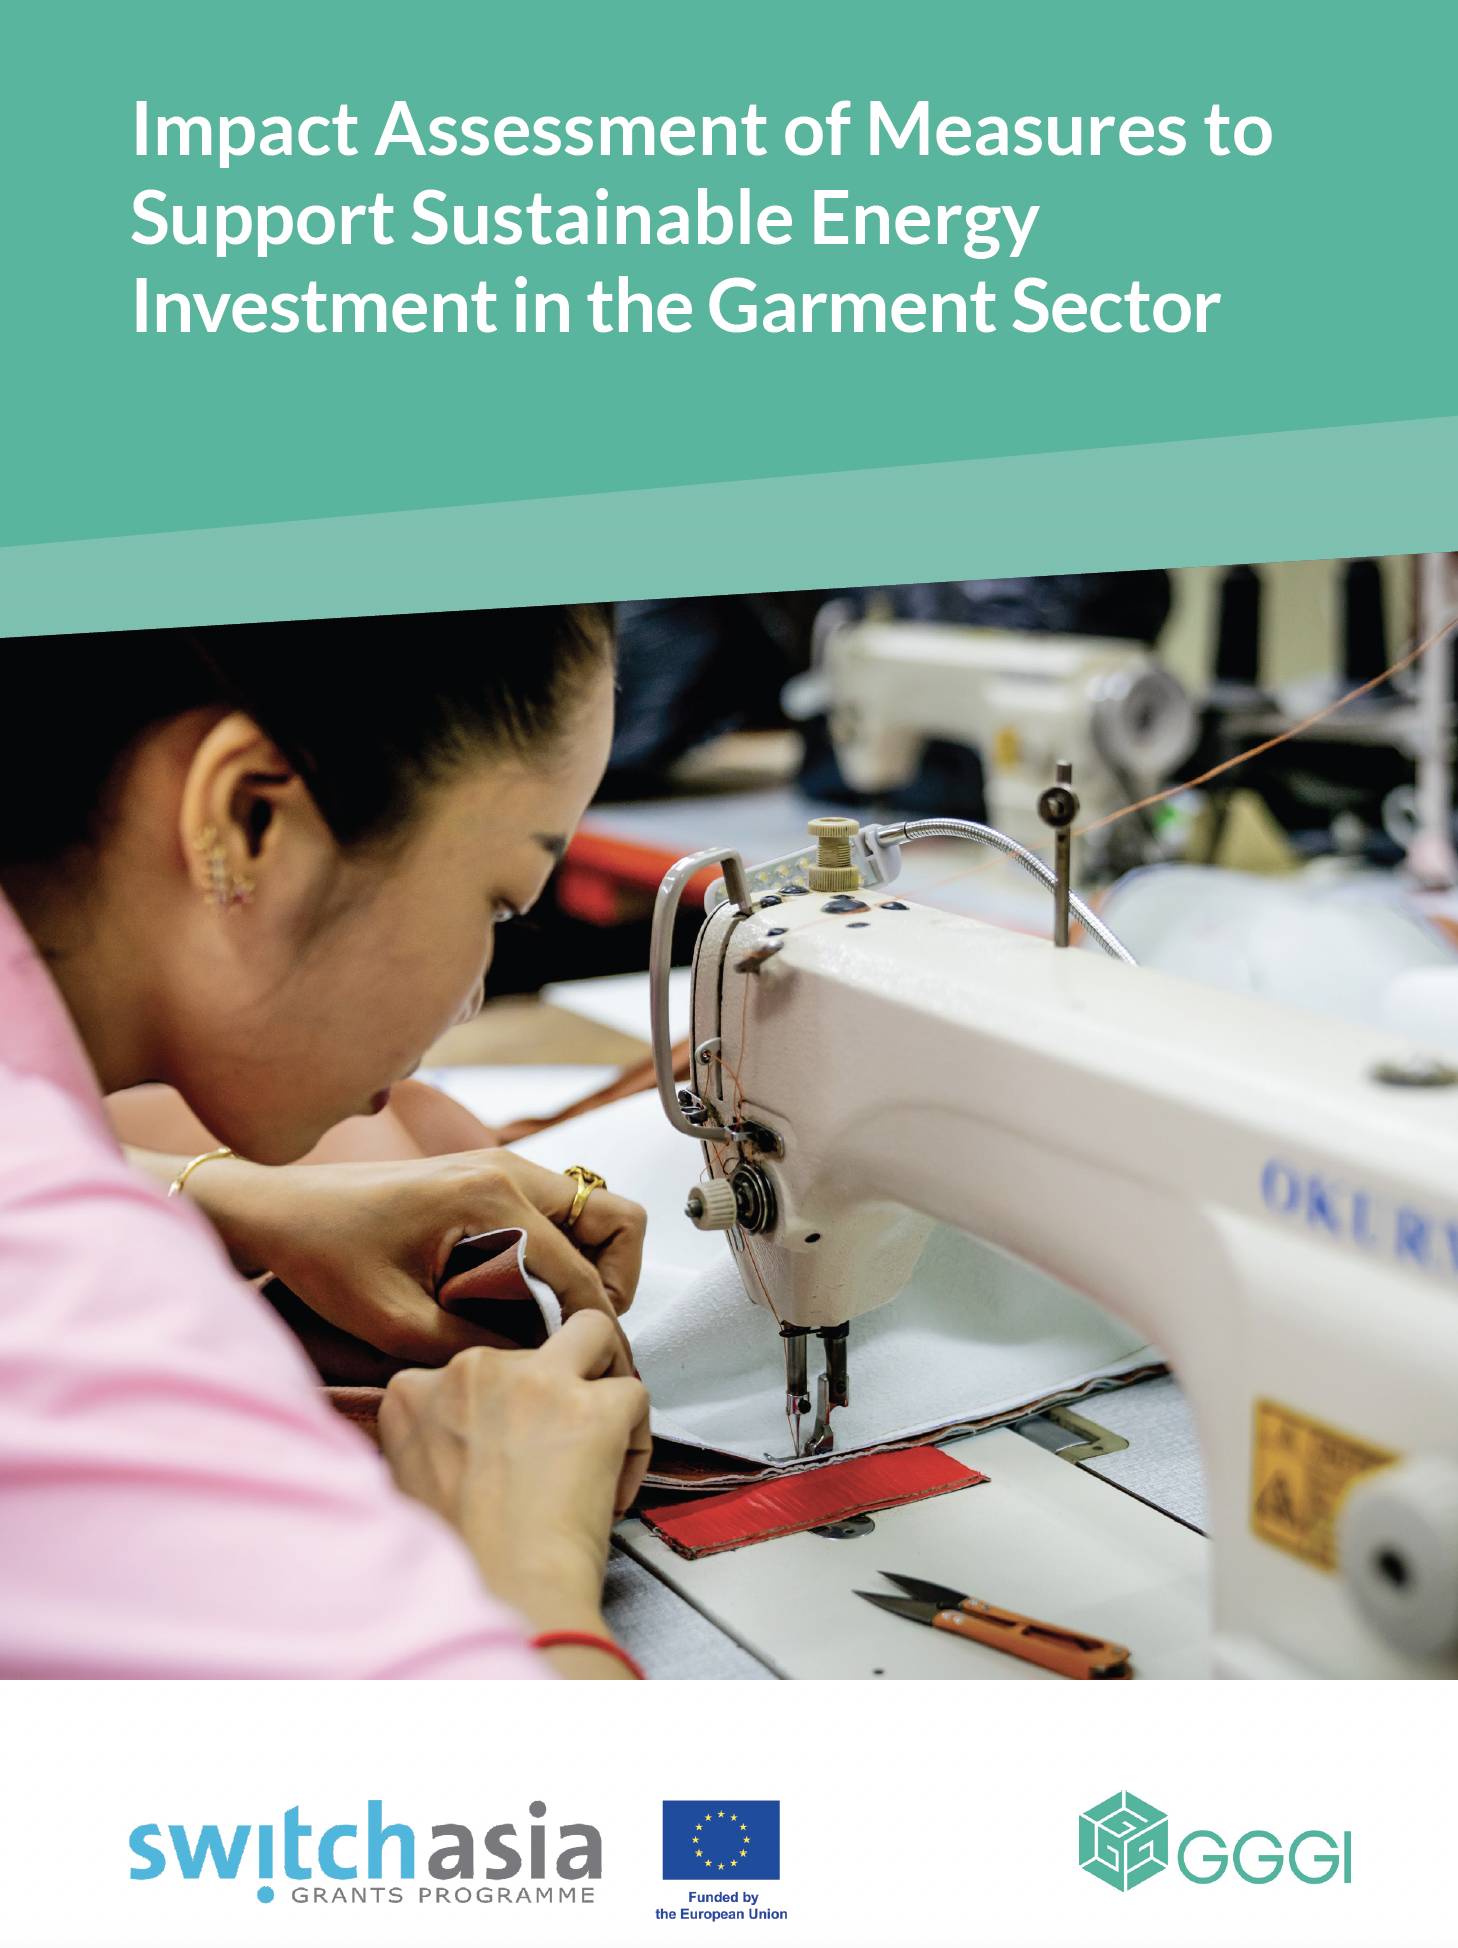 Impact Assessment of Measures to Support Sustainable Energy Investment in the Garment Sector